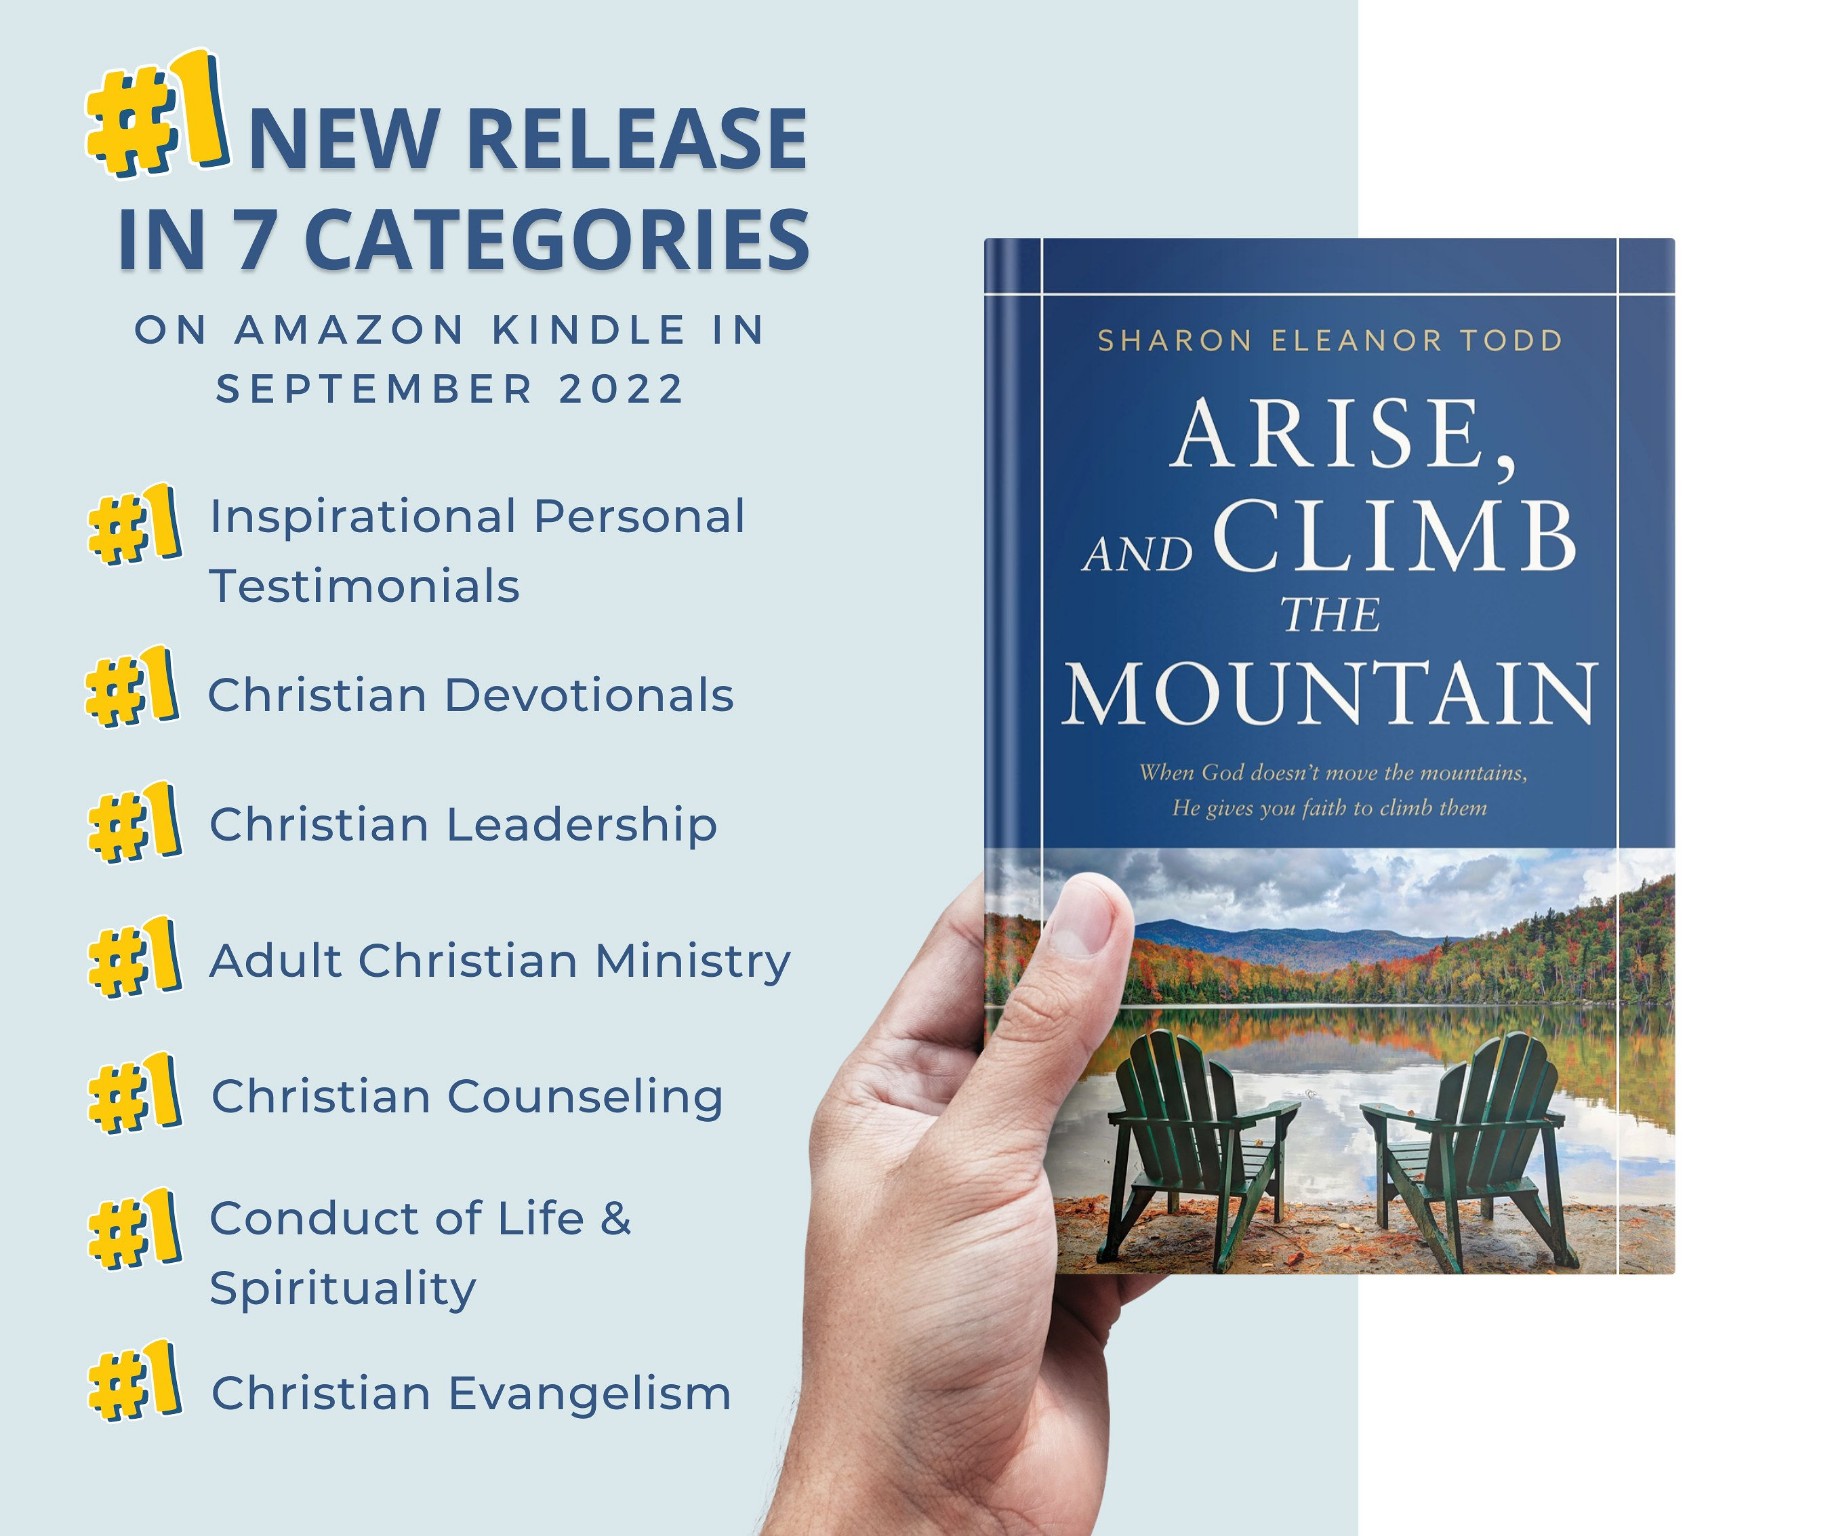 New Release in 7 Categories on Amazon Kindle in September 2022 - Arise, and Climb the Mountain